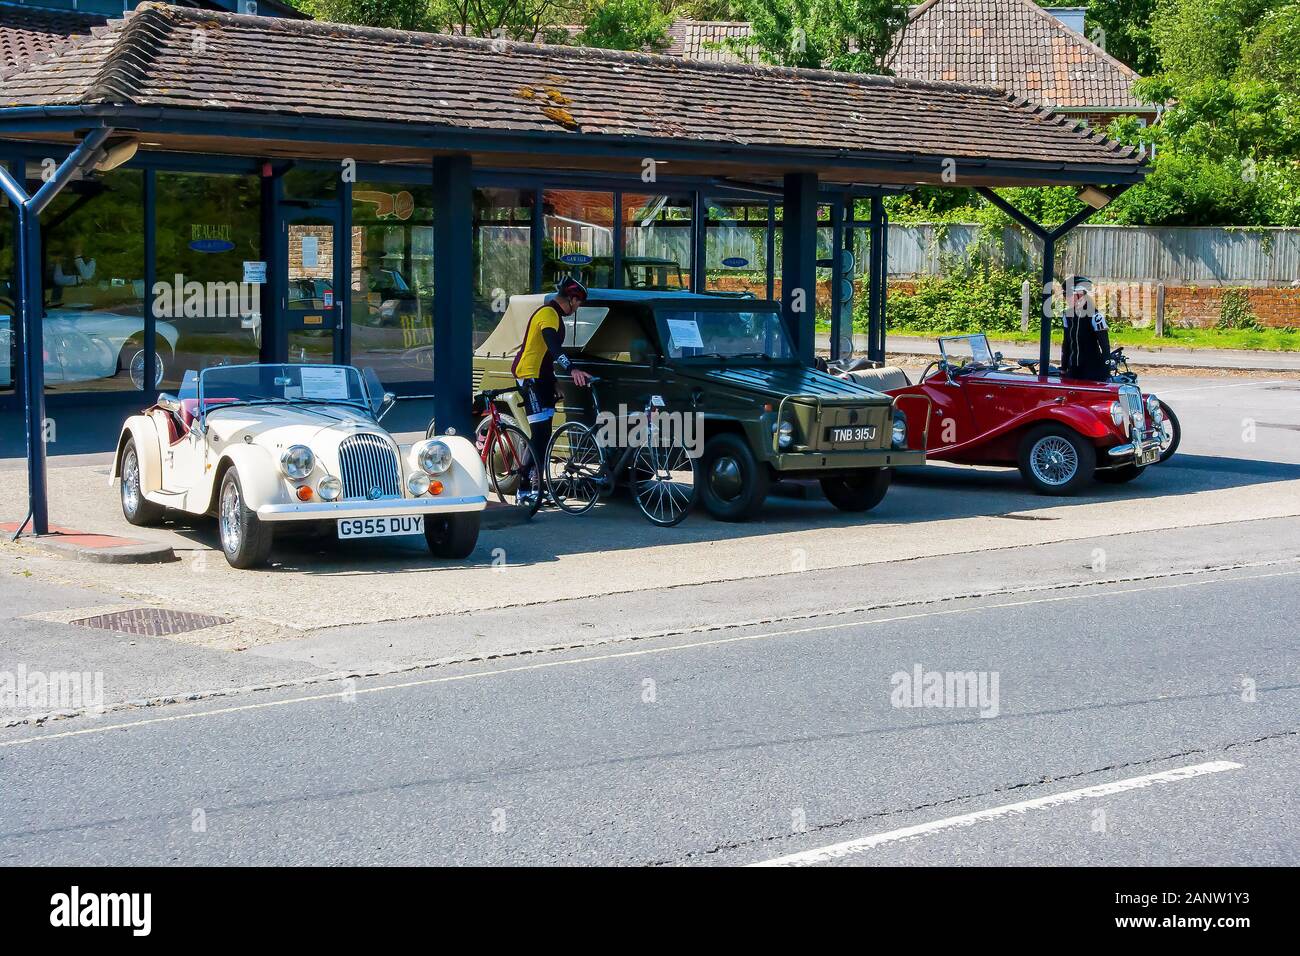 10 June 2015 The forecourt of New Forest Classic Cars Ltd business with classic vintage cars for sale and on display in Beaulieu Village in Hampshire Stock Photo